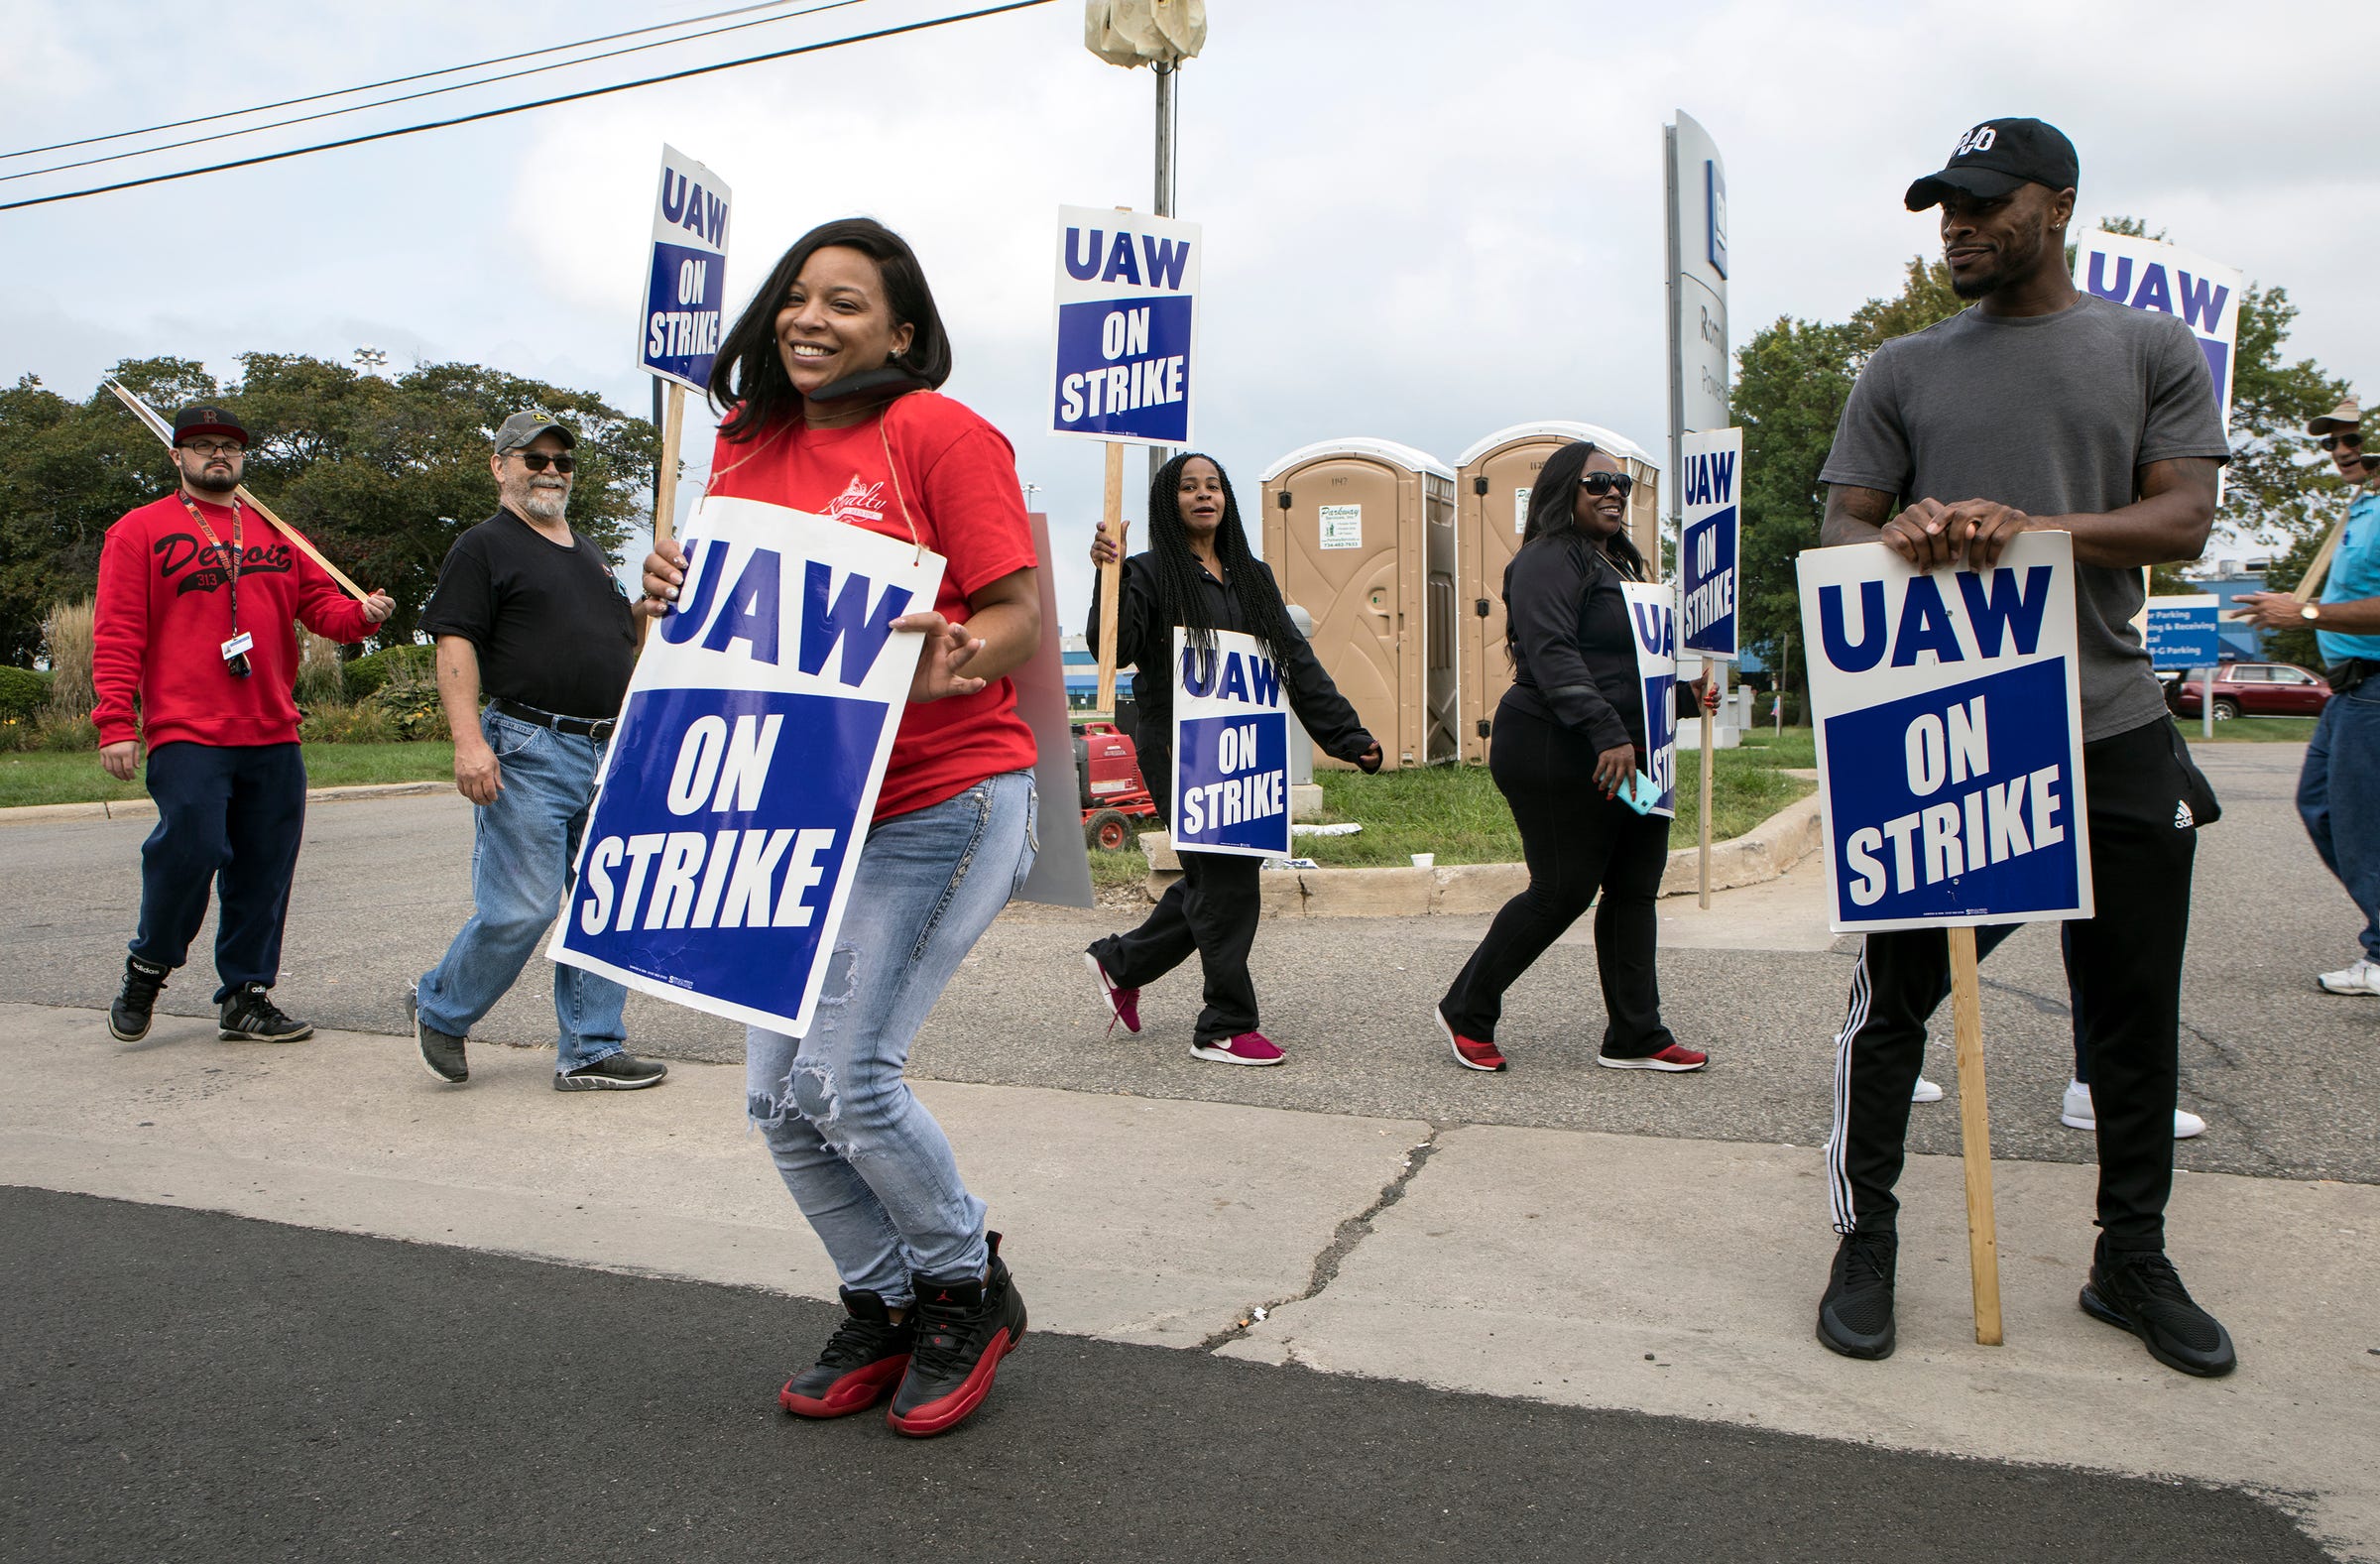 GM health care shift during UAW strike poured gasoline on fire